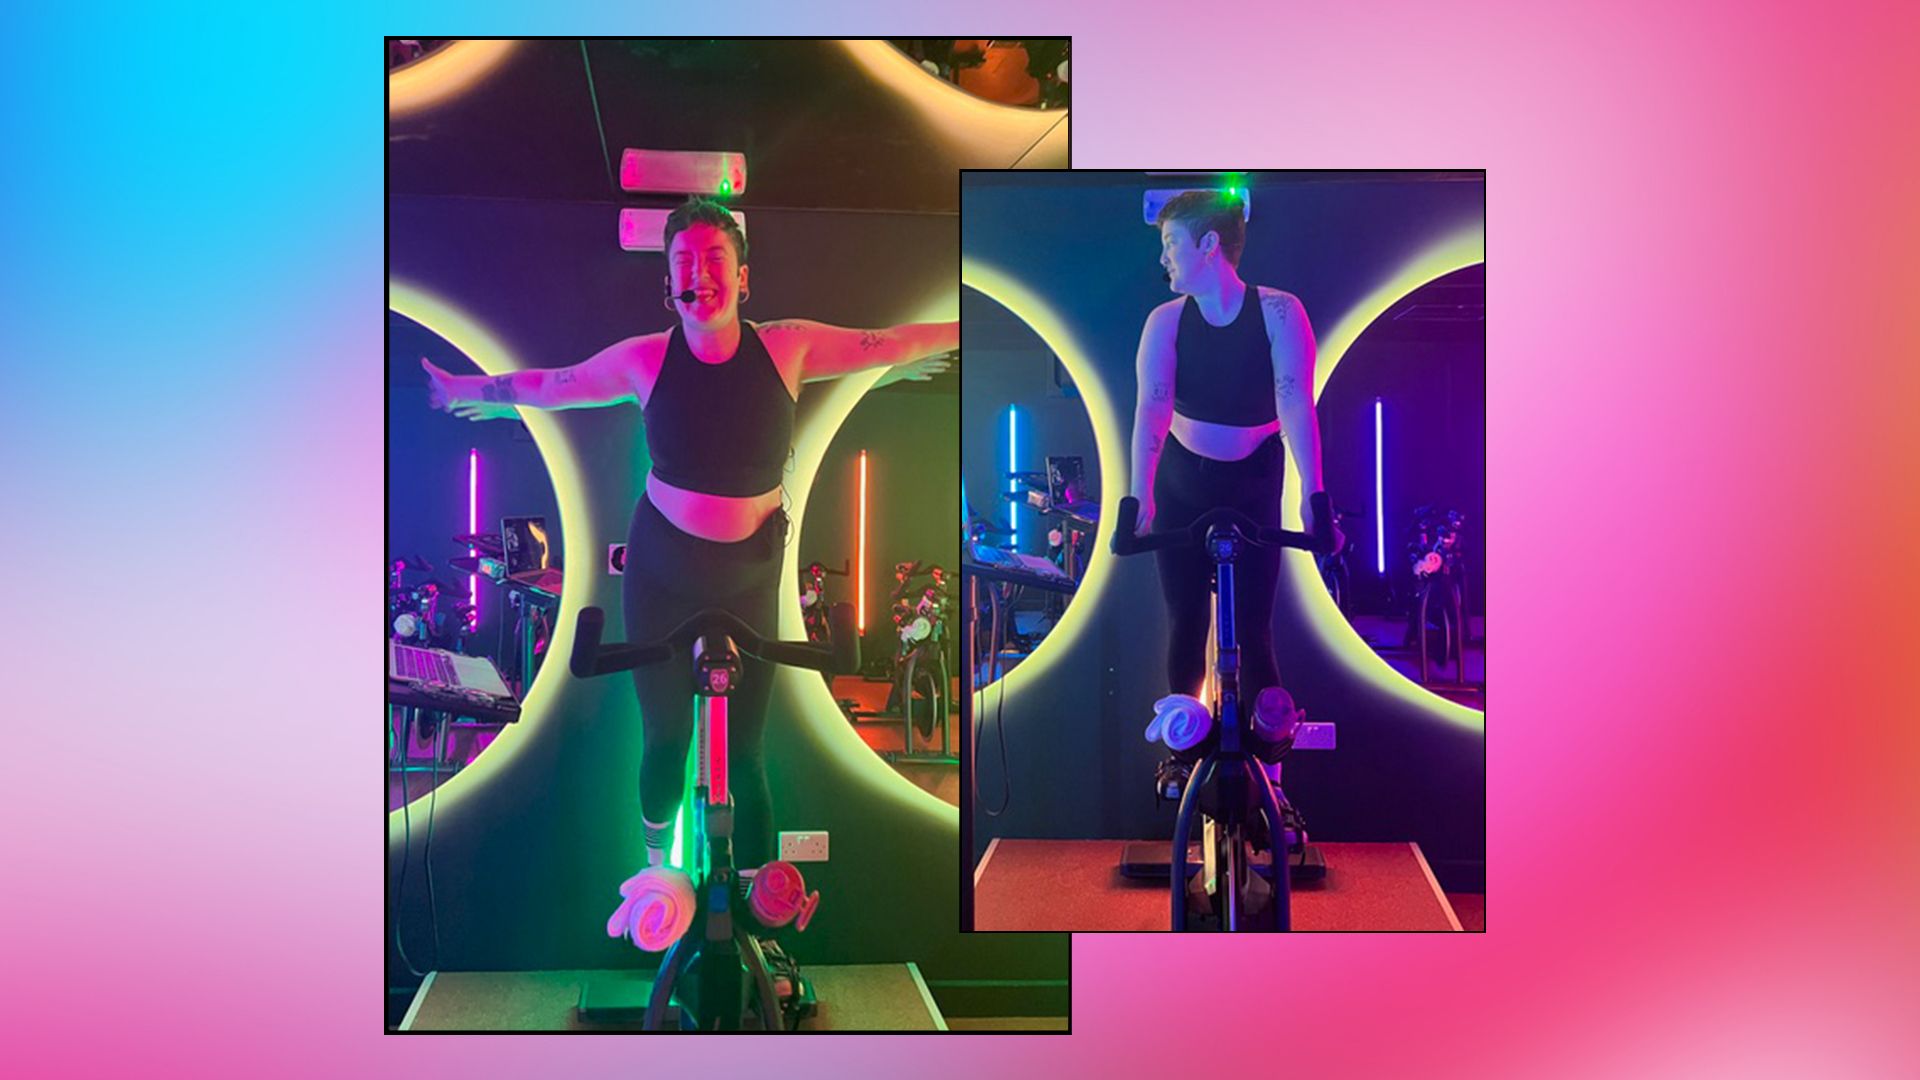 Collage of woman on a spin bike 